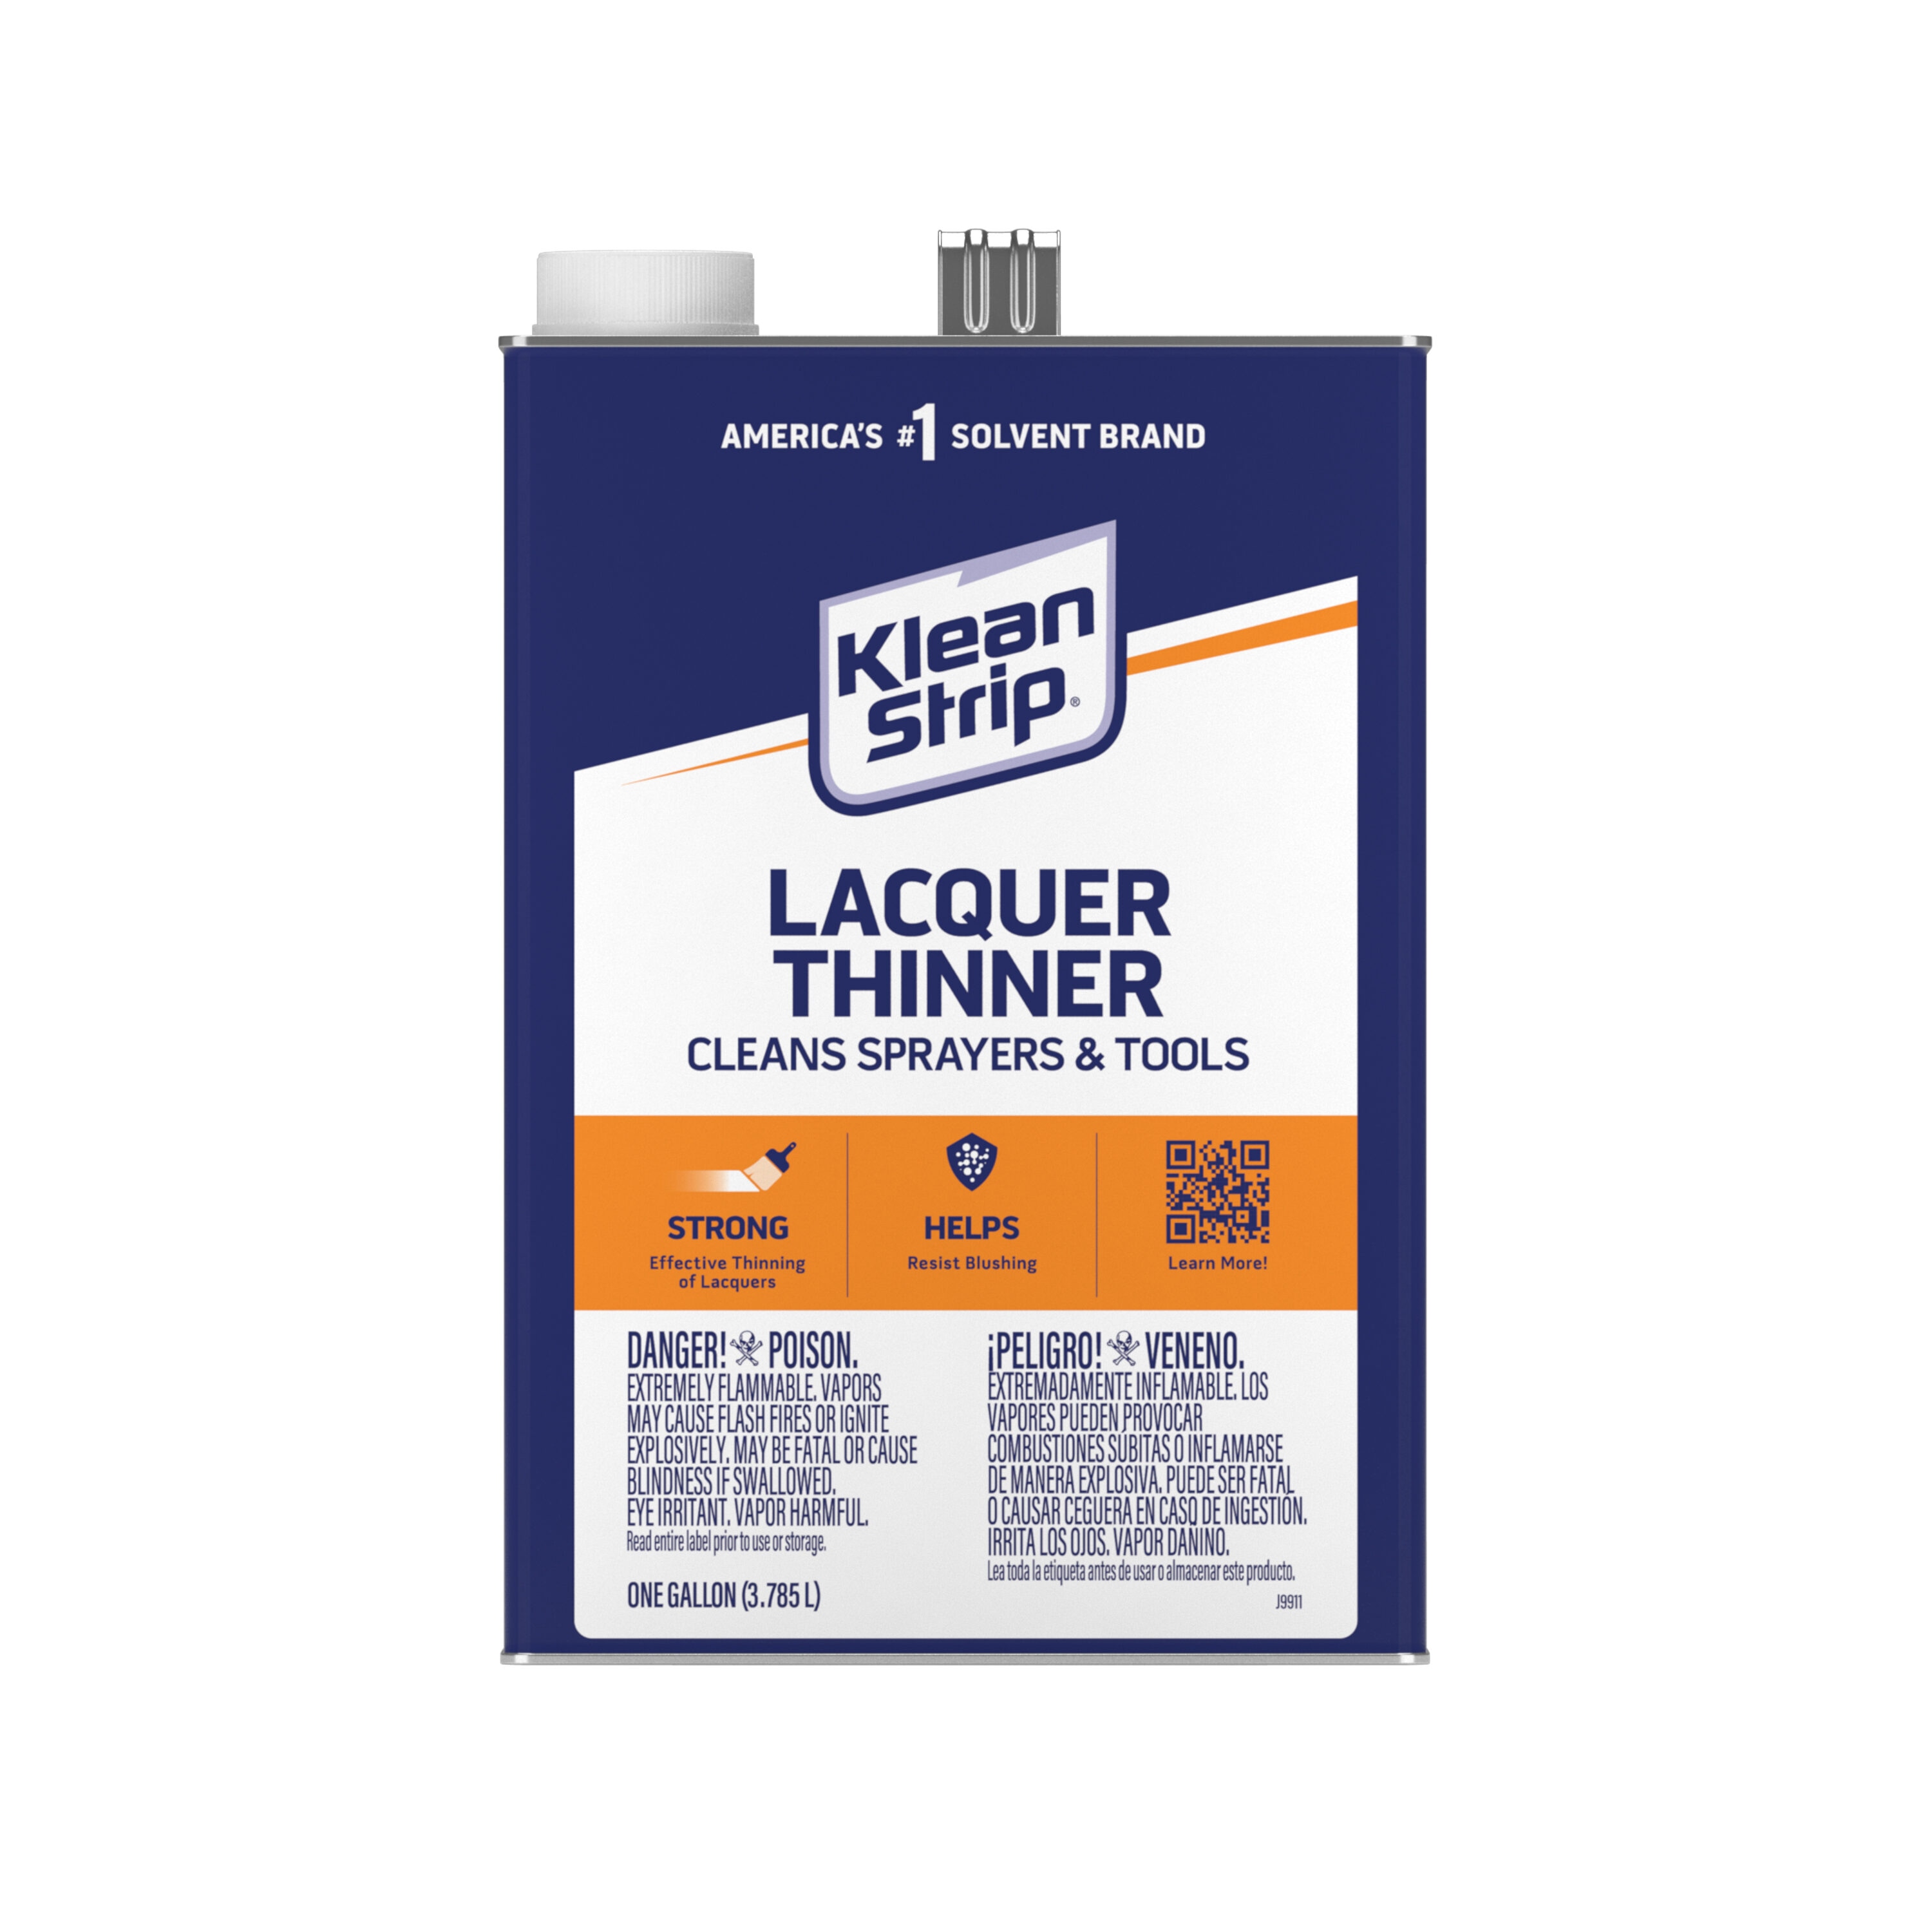 Quality Chemical Company - Lacquer Thinner